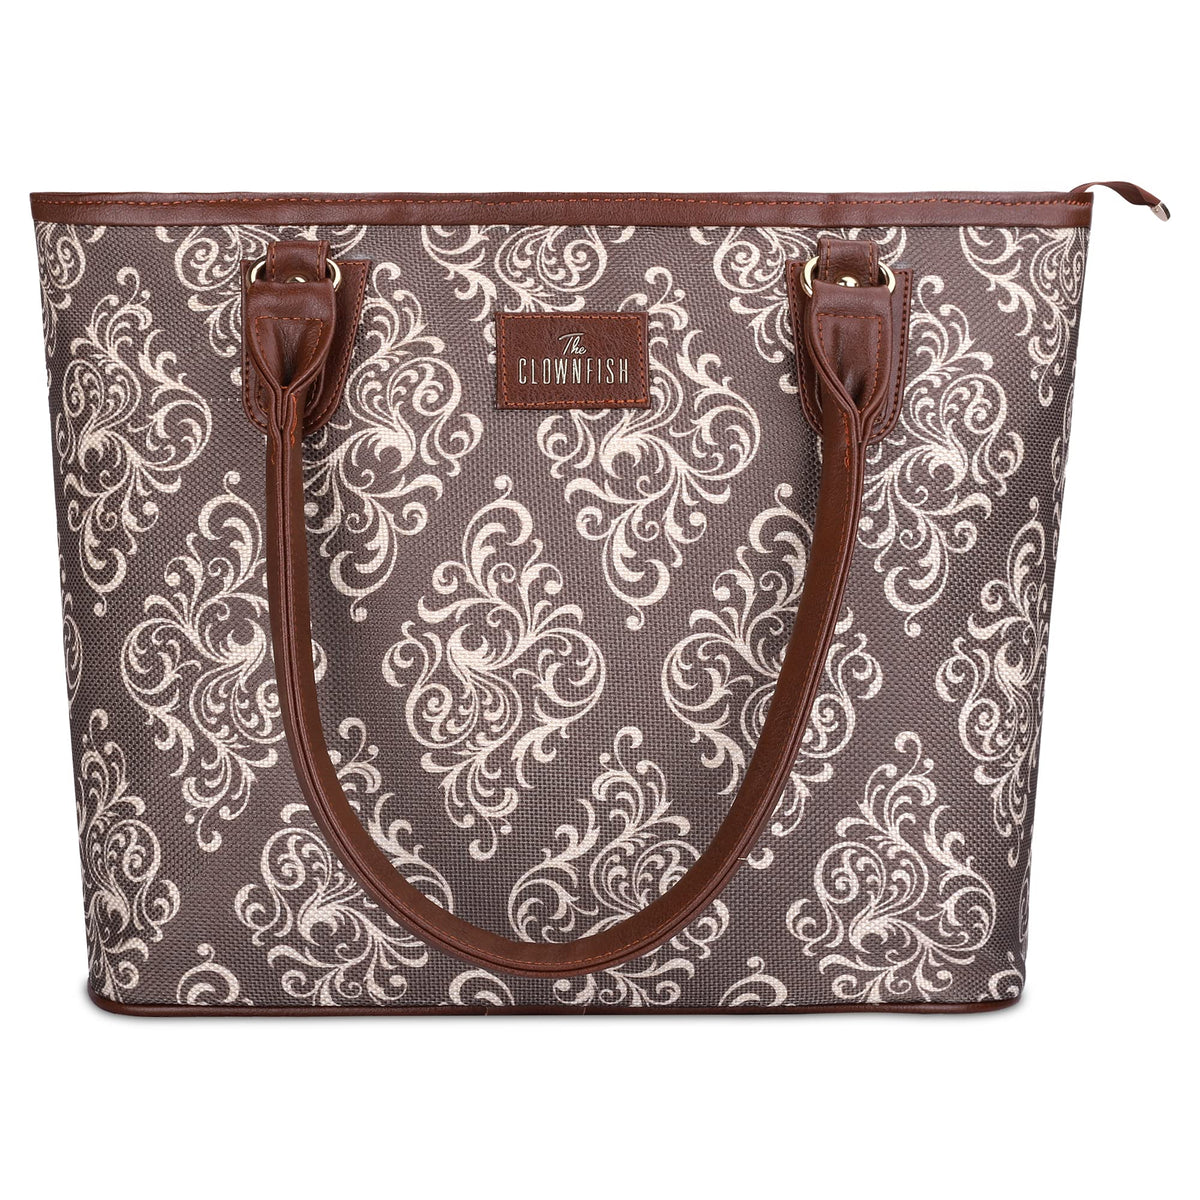 The Clownfish Percy Printed Handicraft Fabric Handbag for Women Office Bag Ladies Shoulder Bag Tote for Women College Girls (Brown)